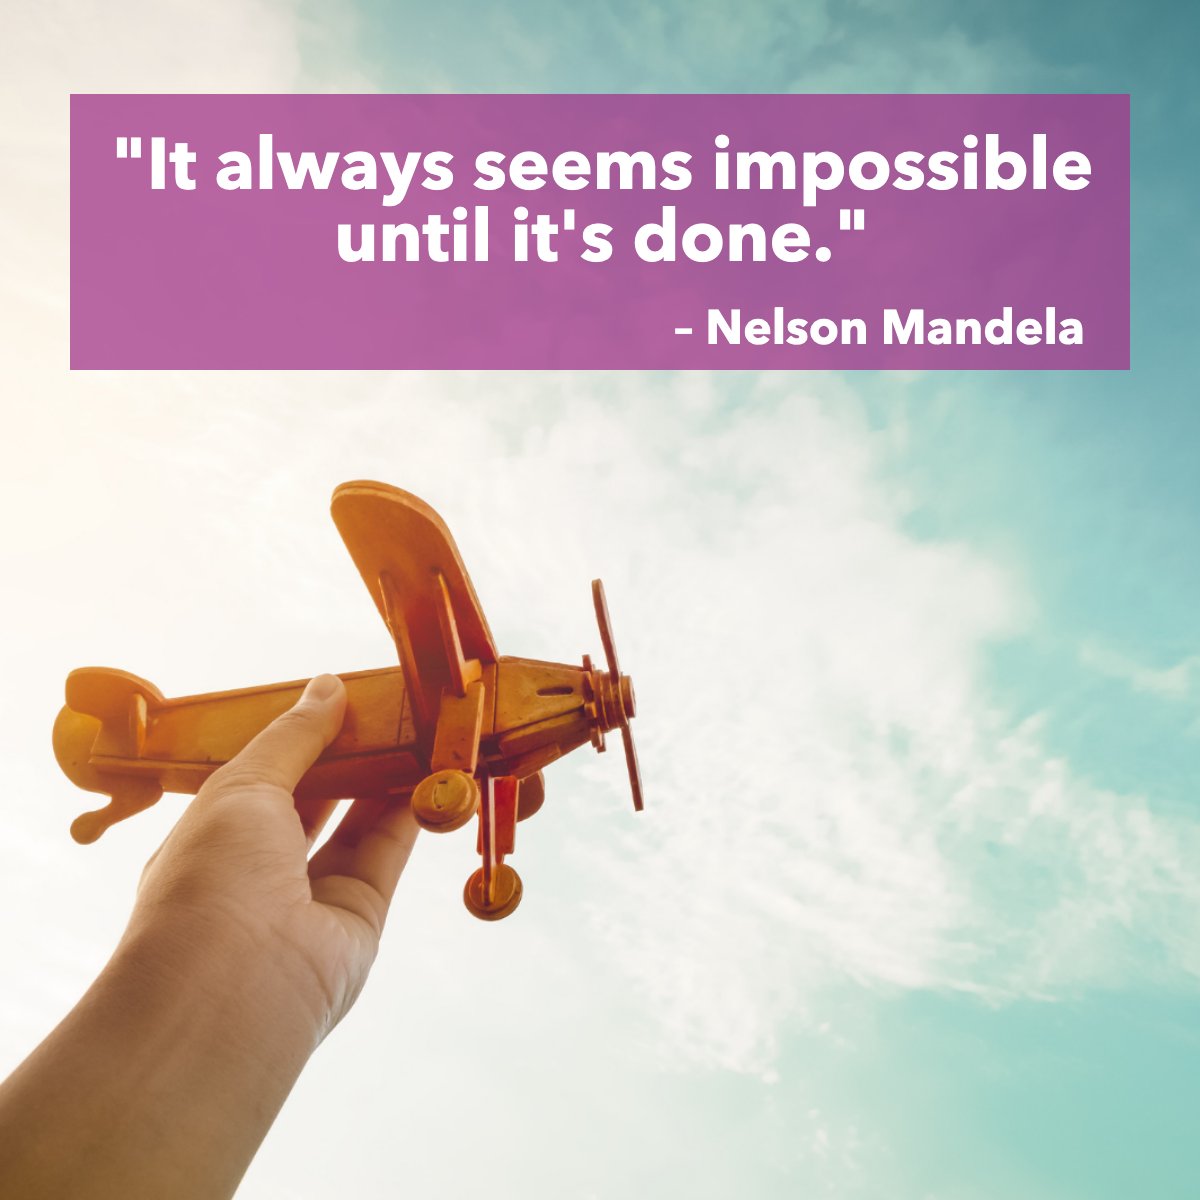 'It always seems impossible until it's done.' 
– Nelson Mandela

What big things are you taking on this week?

#airplane #toyairplane #impossible #fly #quote #inspirational #sky #nelsonmandela
 #RiversideRealestate #RiversideHomes #RiversideBroker #JamesCottrell